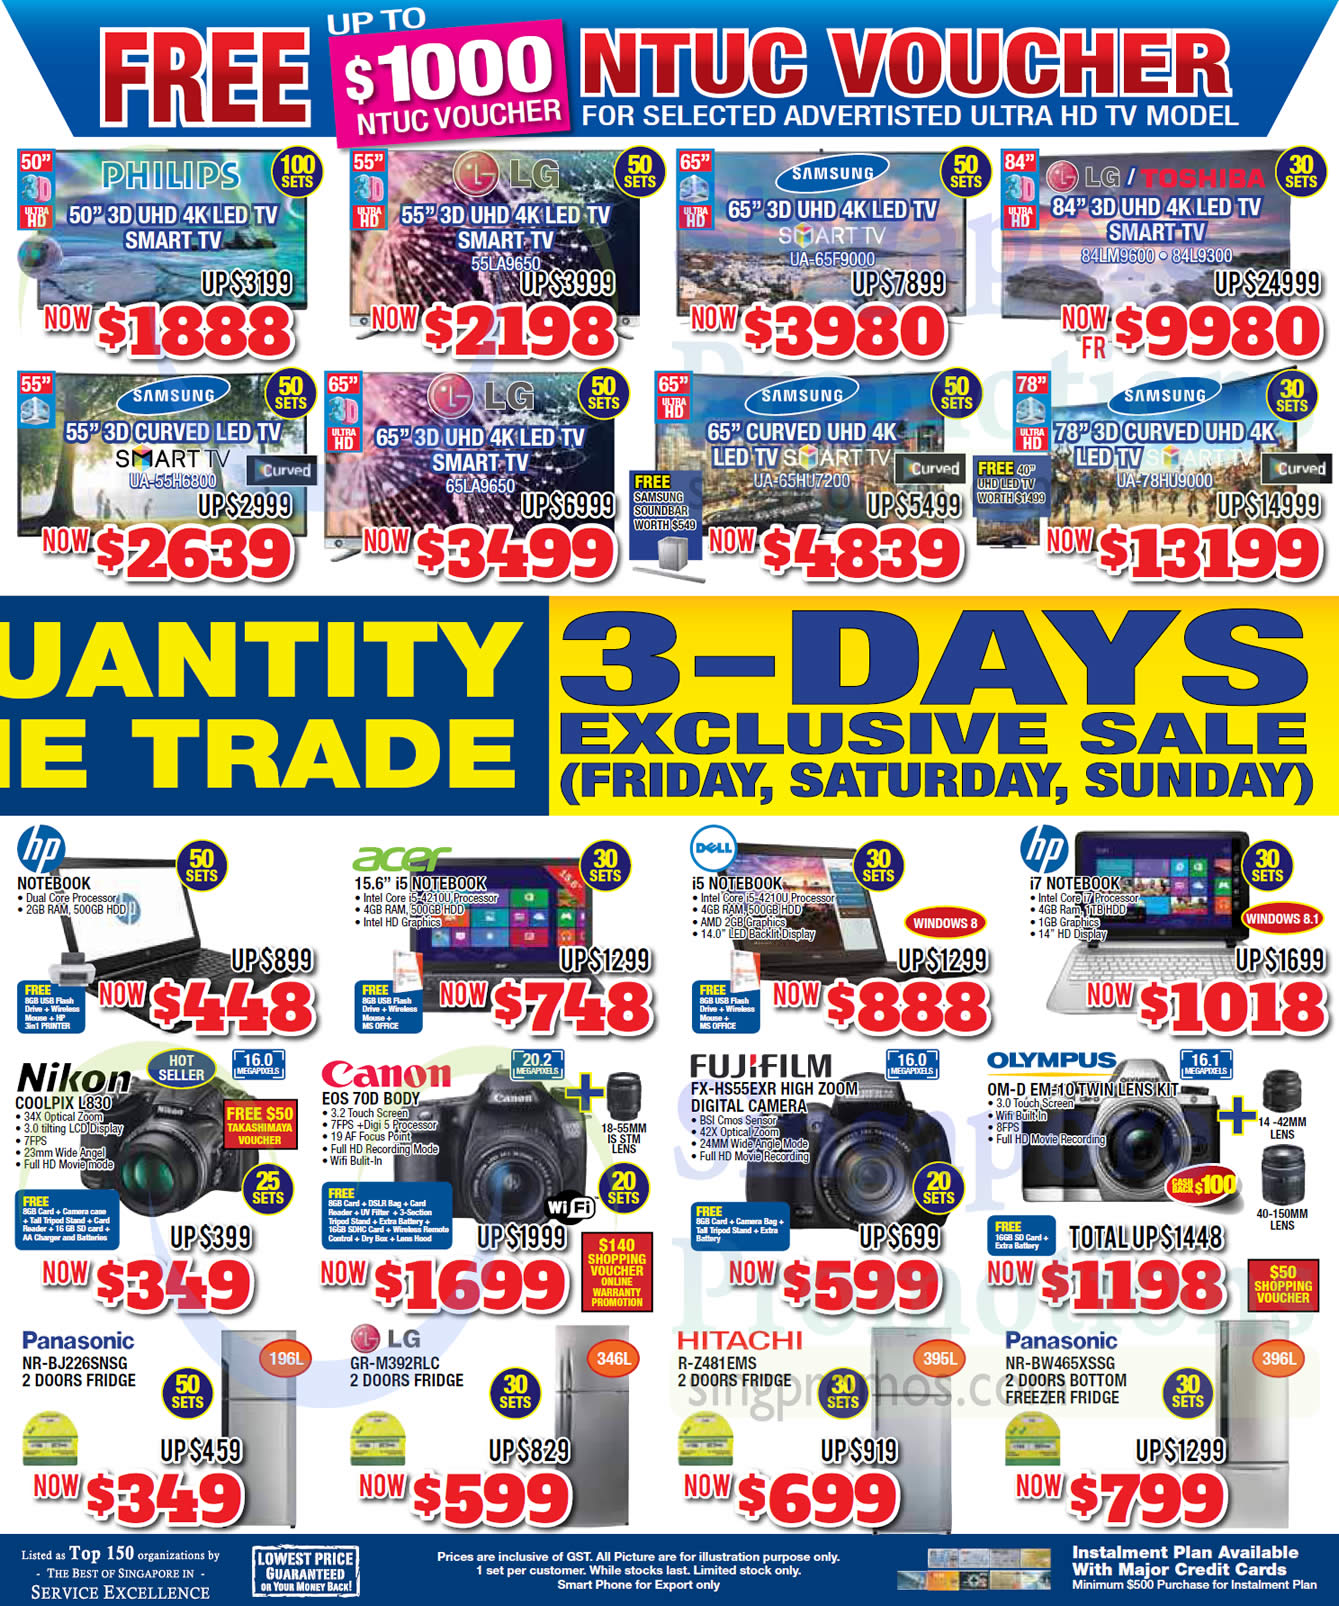 Featured image for Audio House Electronics, TV, Notebooks & Appliances Offers @ Liang Court 21 - 23 Nov 2014